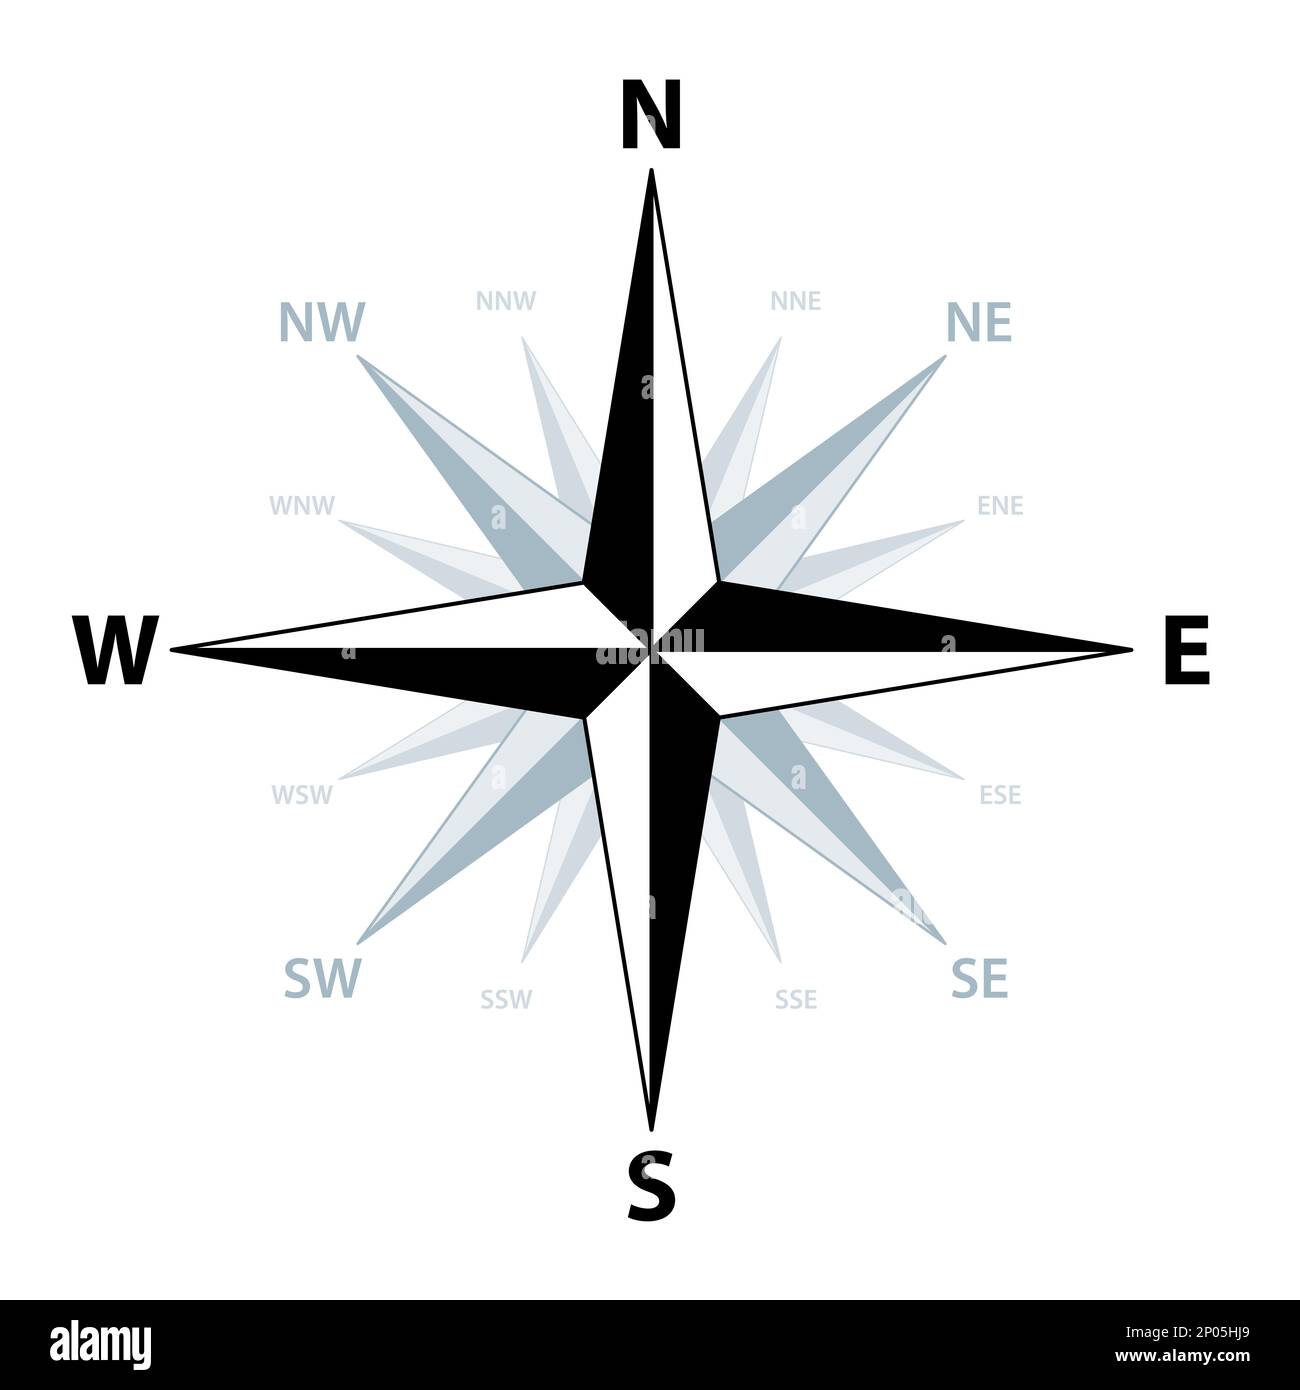 Compass rose, showing the four cardinal directions North, East, South and West, the four intercardinal directions, and eight more divisions. Stock Photo